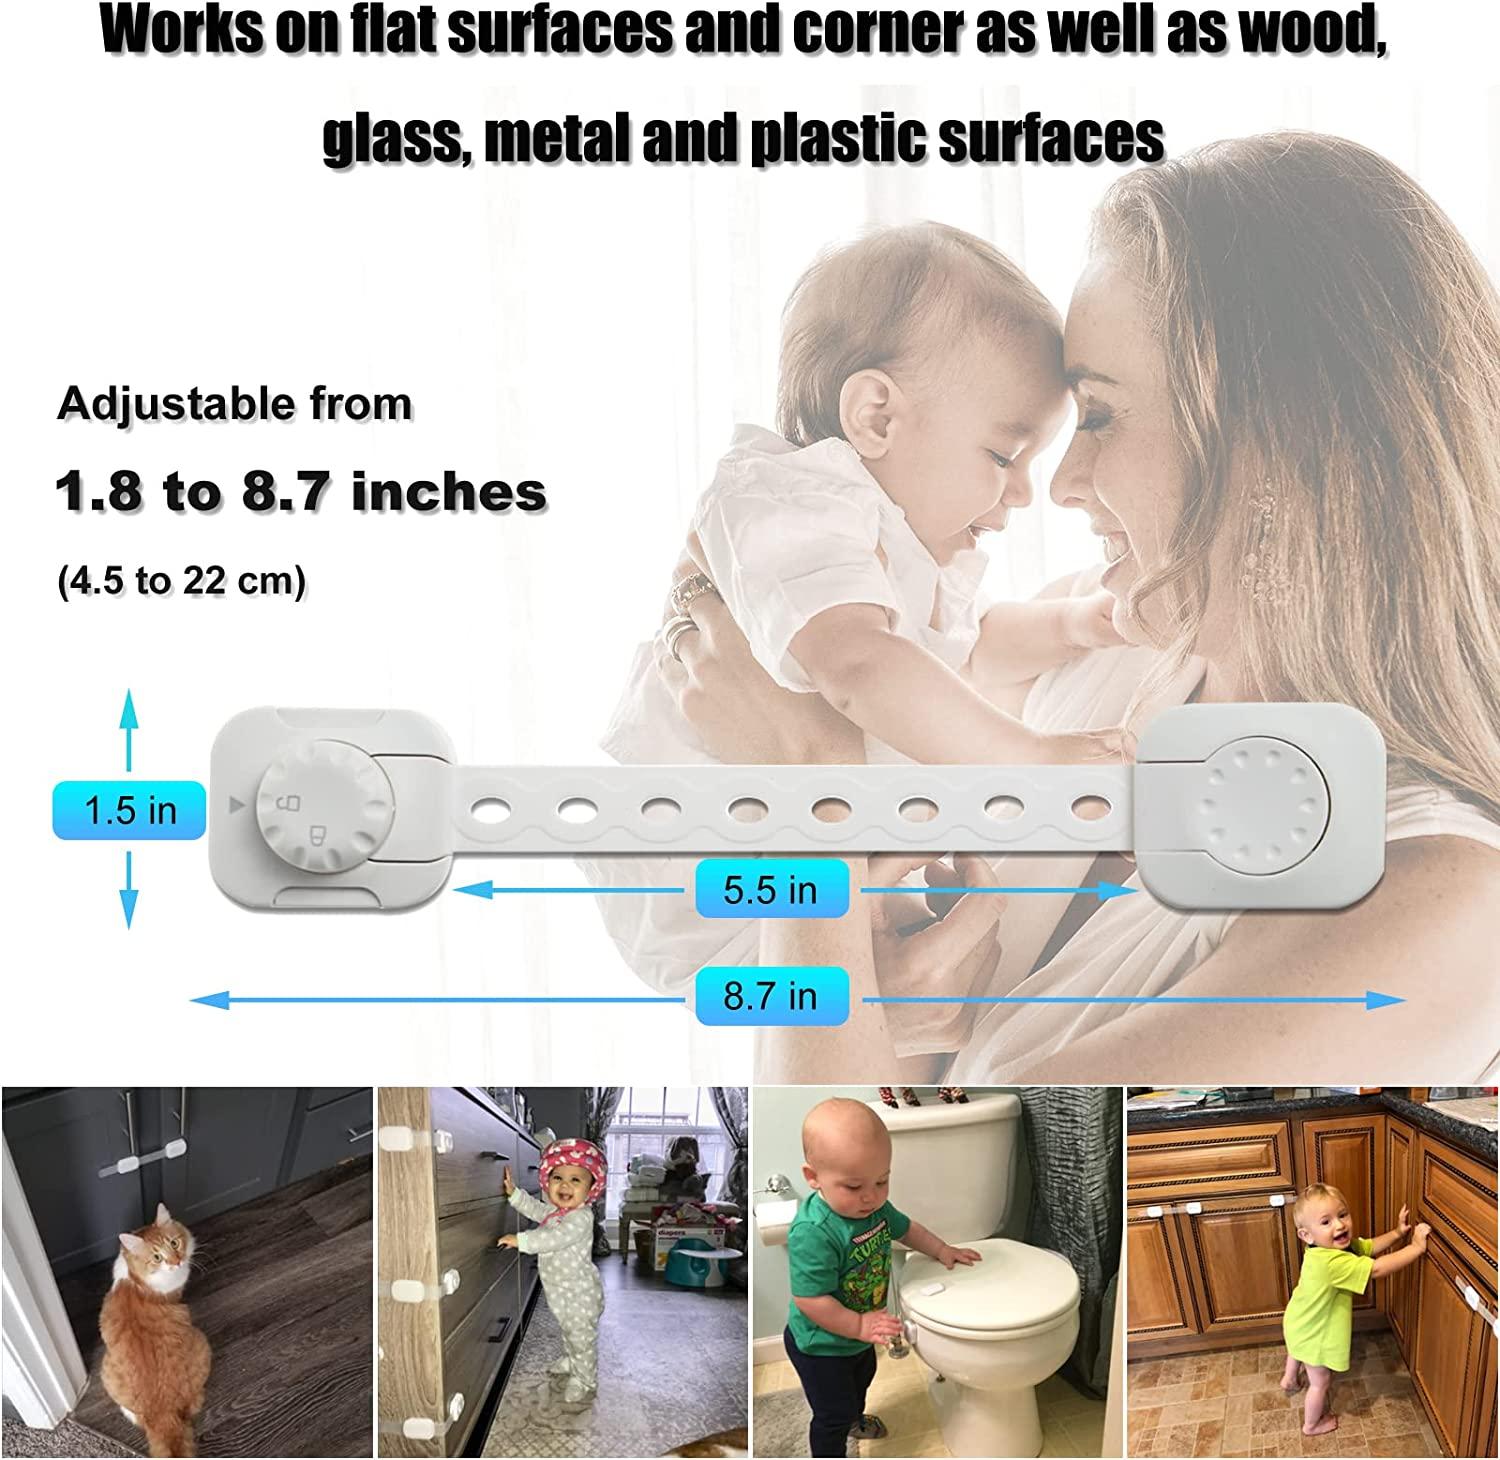 Toilet Locks Baby Proof Child Toddlers, [2 Packs] Sturdy Safety Toilet Lid  Seat Proofer Lock for Kids Pets Dog, Easy Installation and Fit Most Toilets